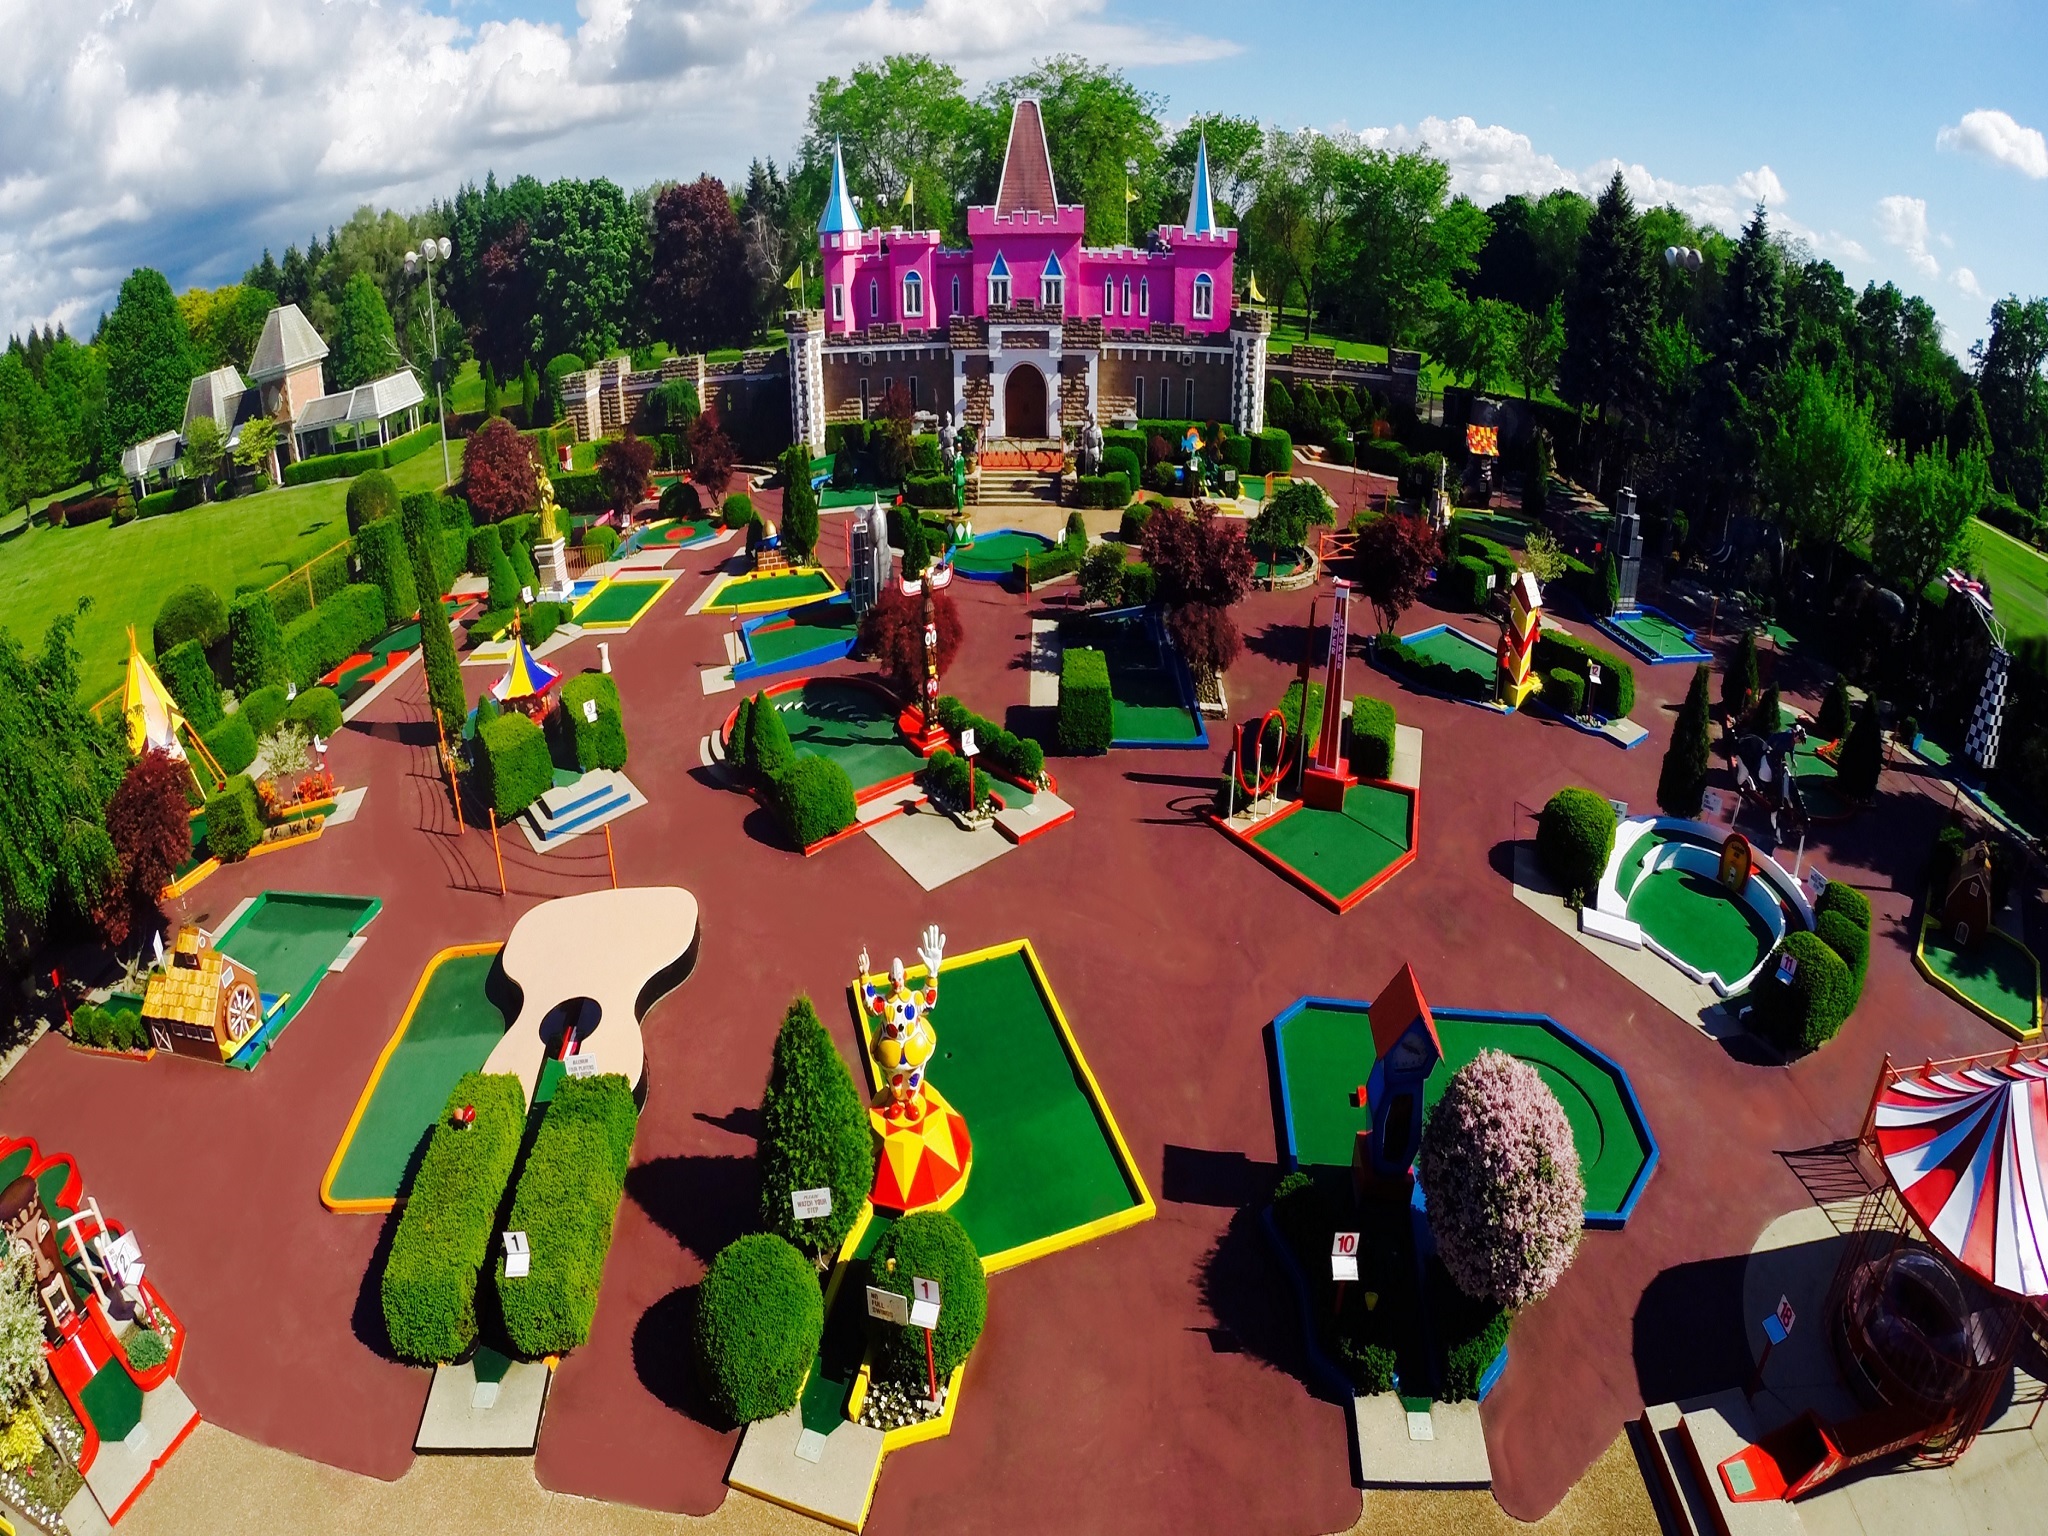 places to play putt putt near me